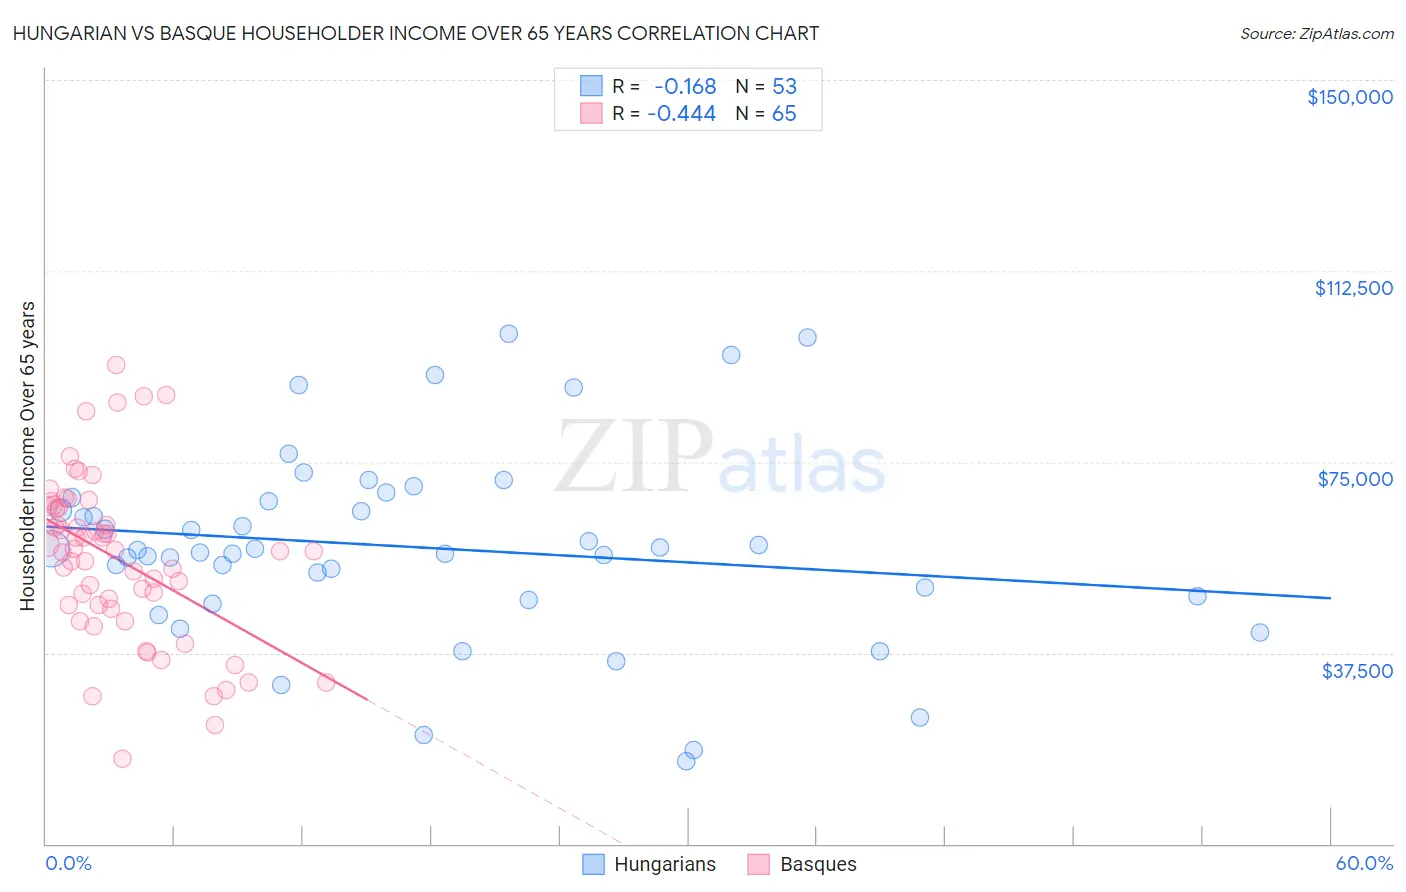 Hungarian vs Basque Householder Income Over 65 years